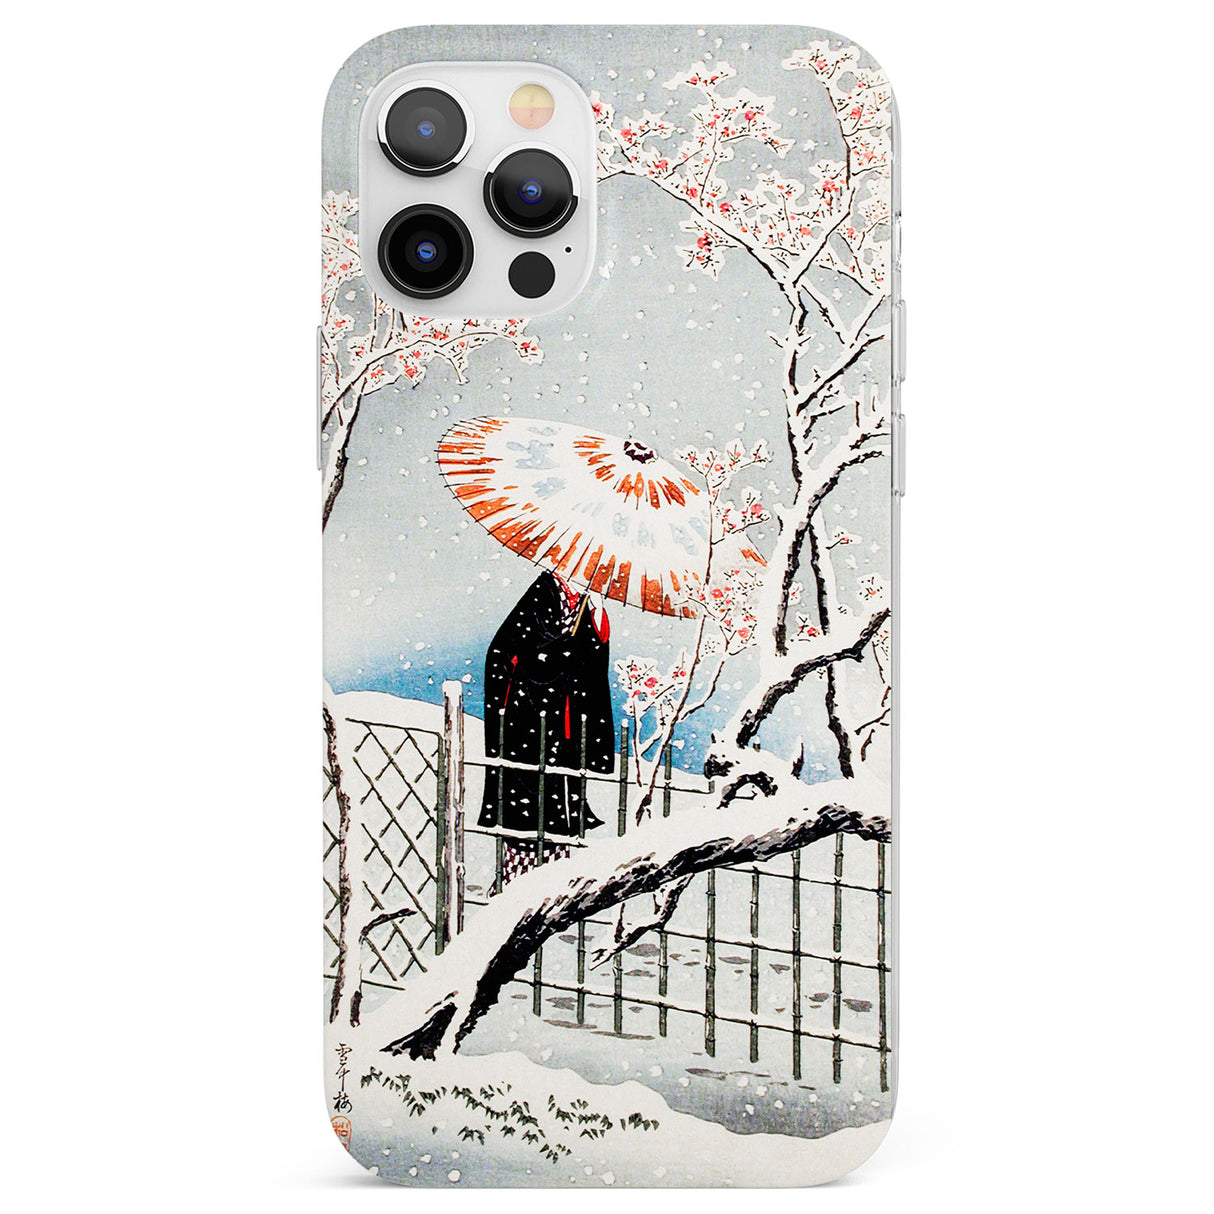 Plum Tree in Snow by Hiroaki Takahashi Phone Case for iPhone 12 Pro